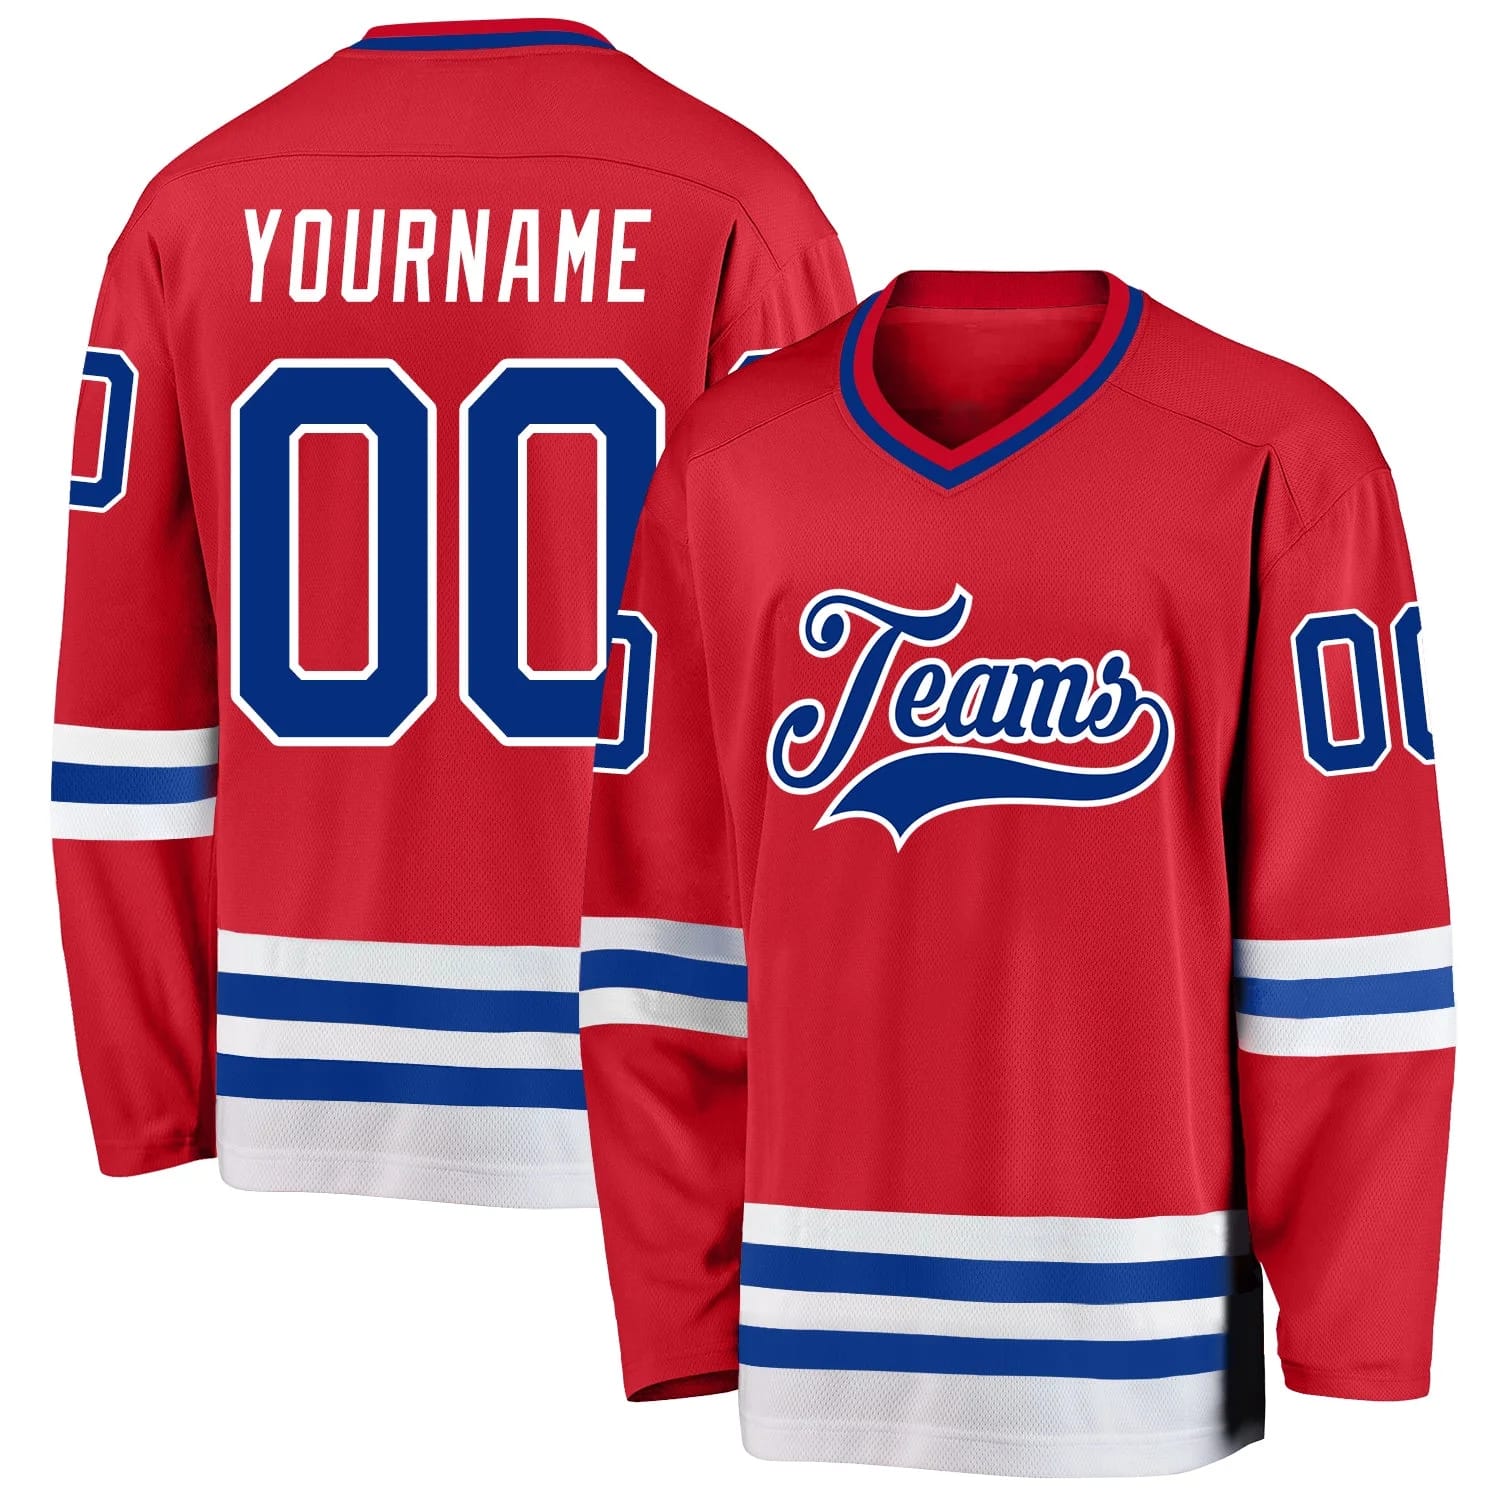 Stitched And Print Red Royal-white Hockey Jersey Custom